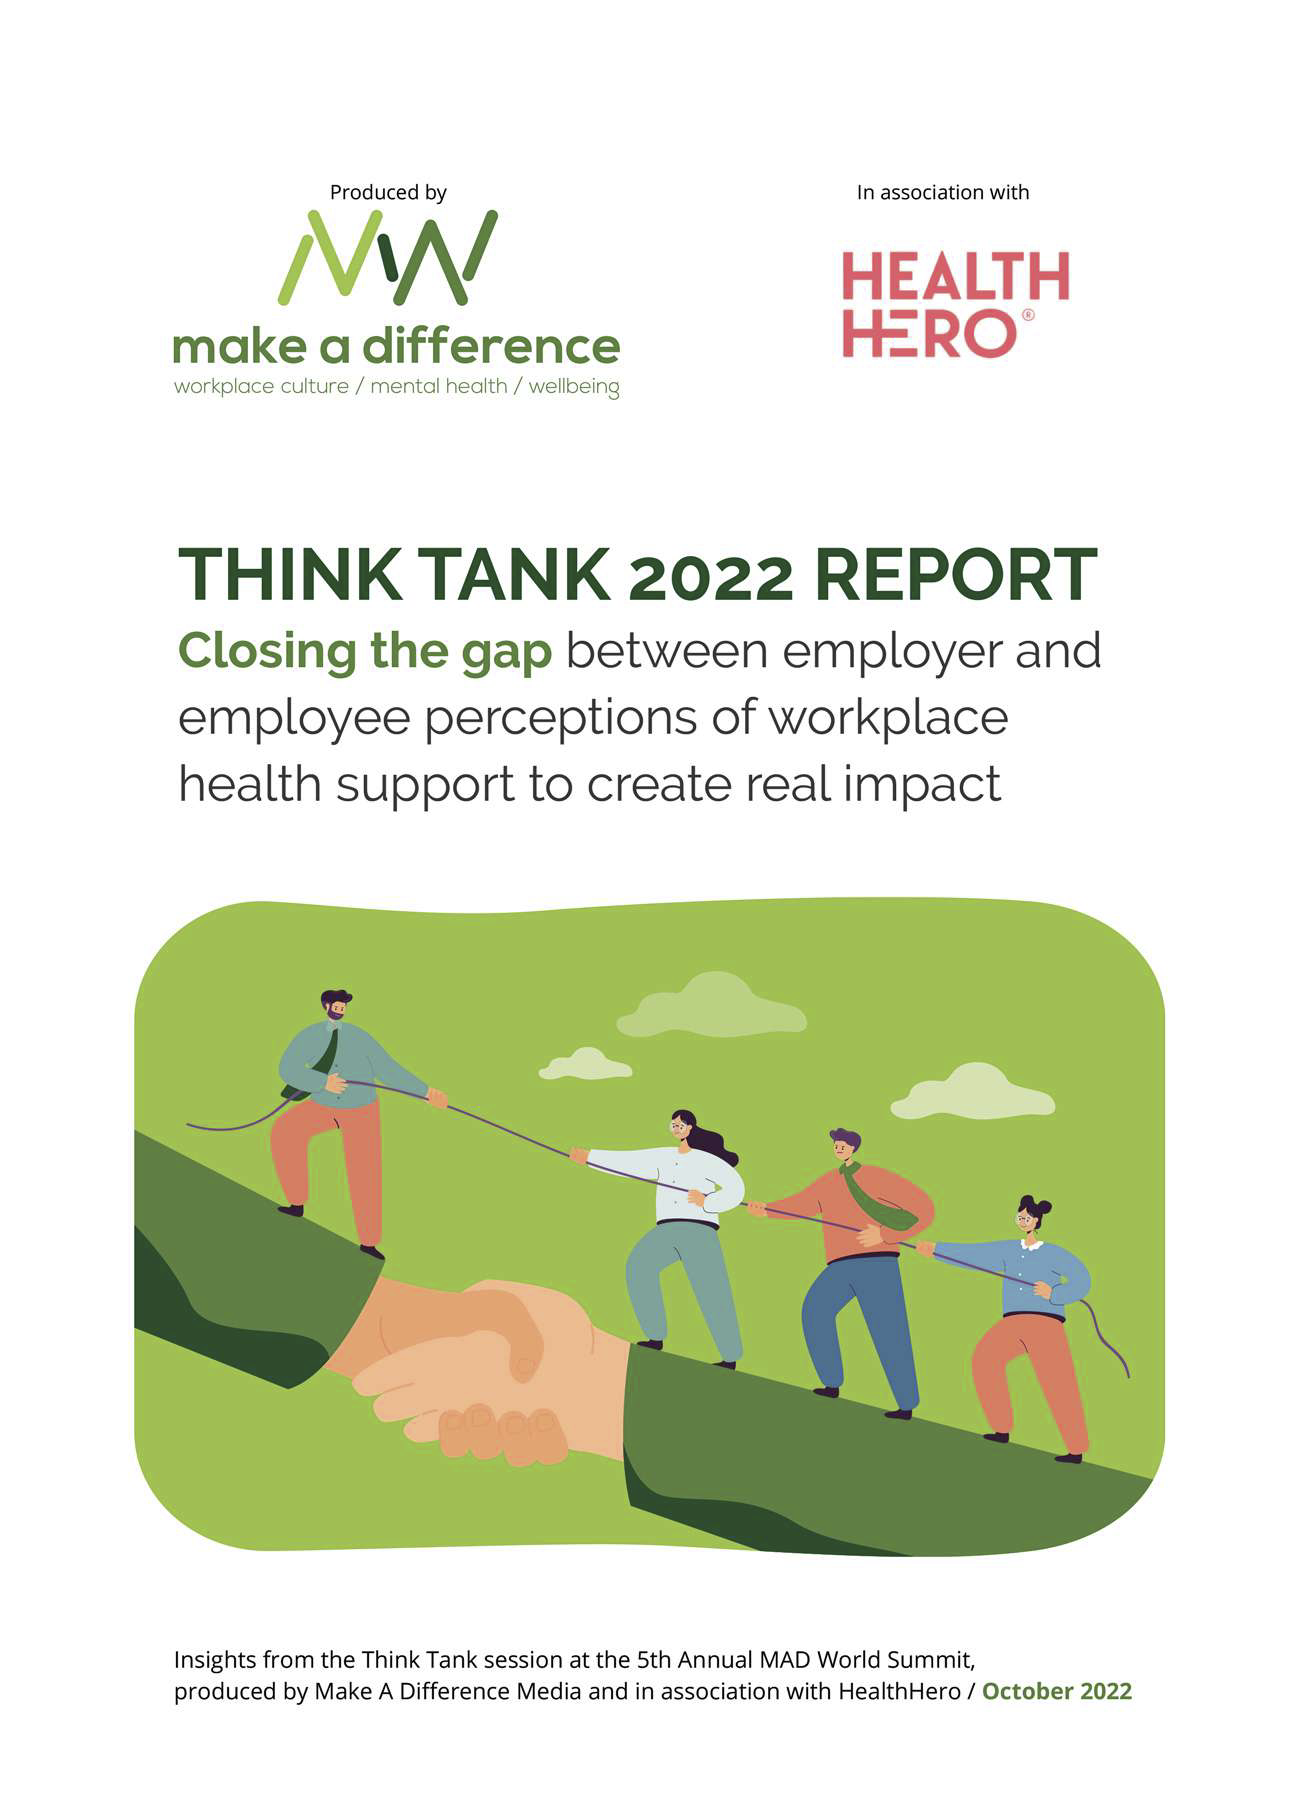 THINK TANK 2022 REPORT: Closing the gap between employer and employee perceptions of workplace health support to create real impact